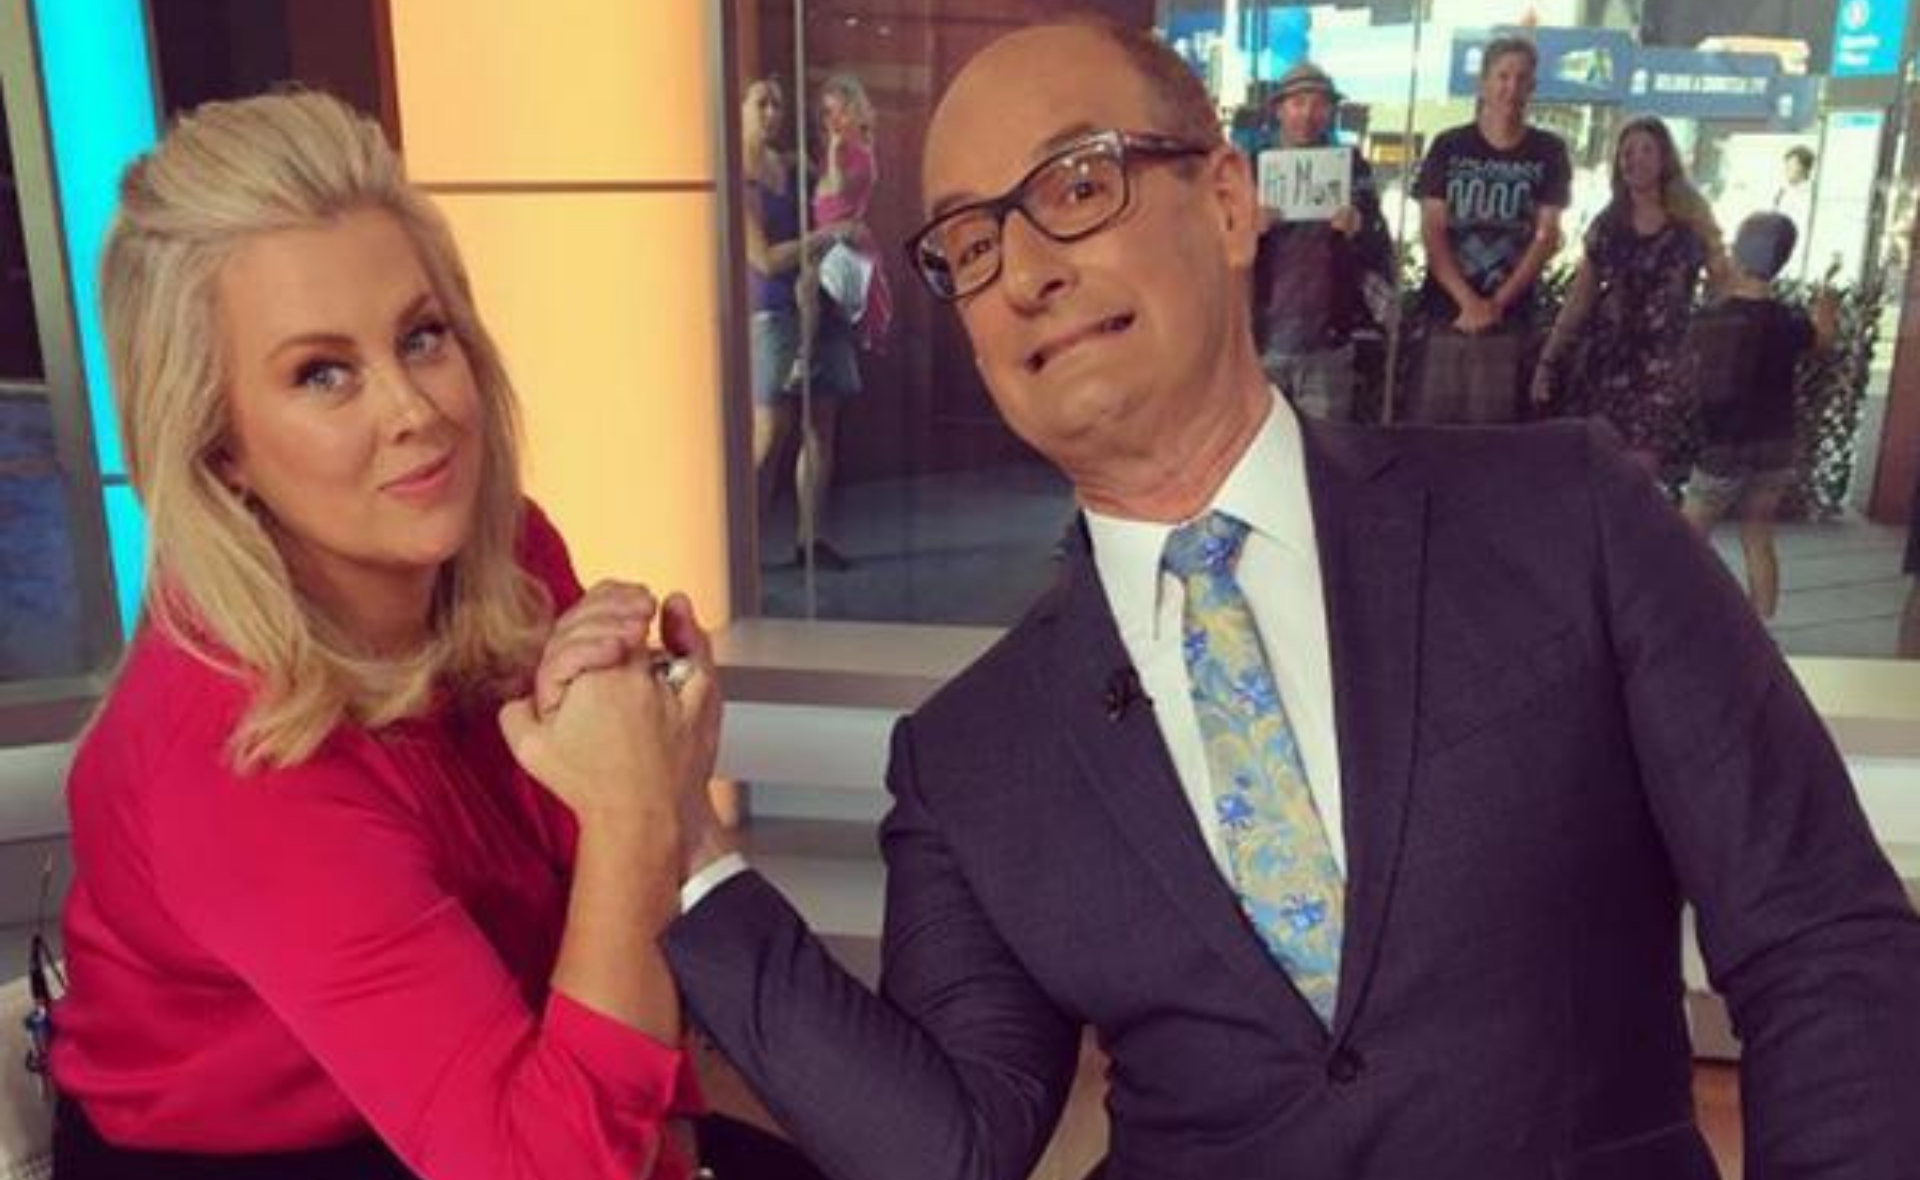 Samantha Armytage has confirmed she is leaving Sunrise in an emotional statement